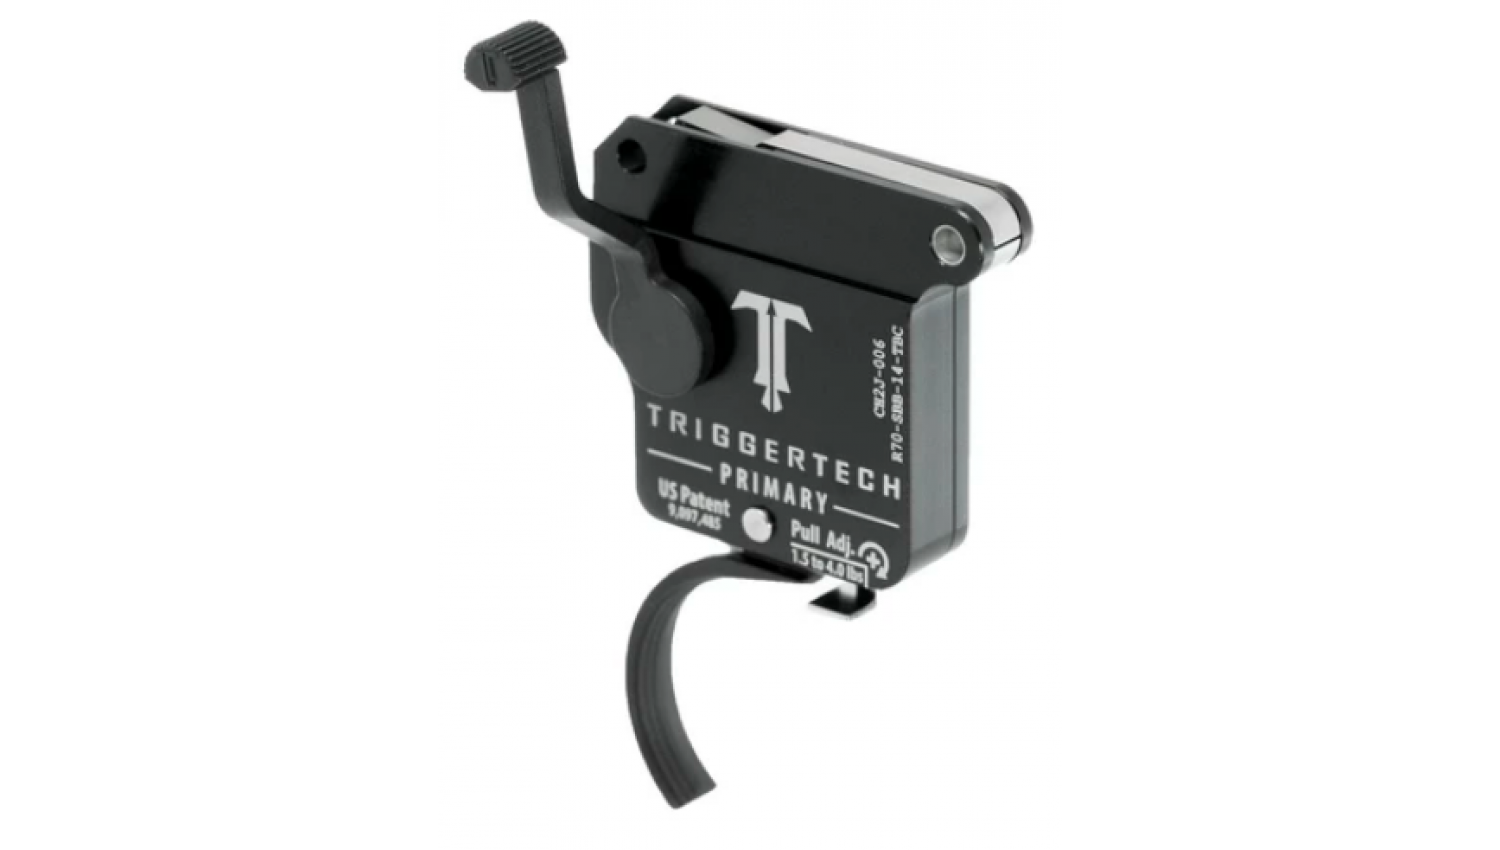 TriggerTech Primary Remington 700 PVD Black Curved Drop In Trigger.